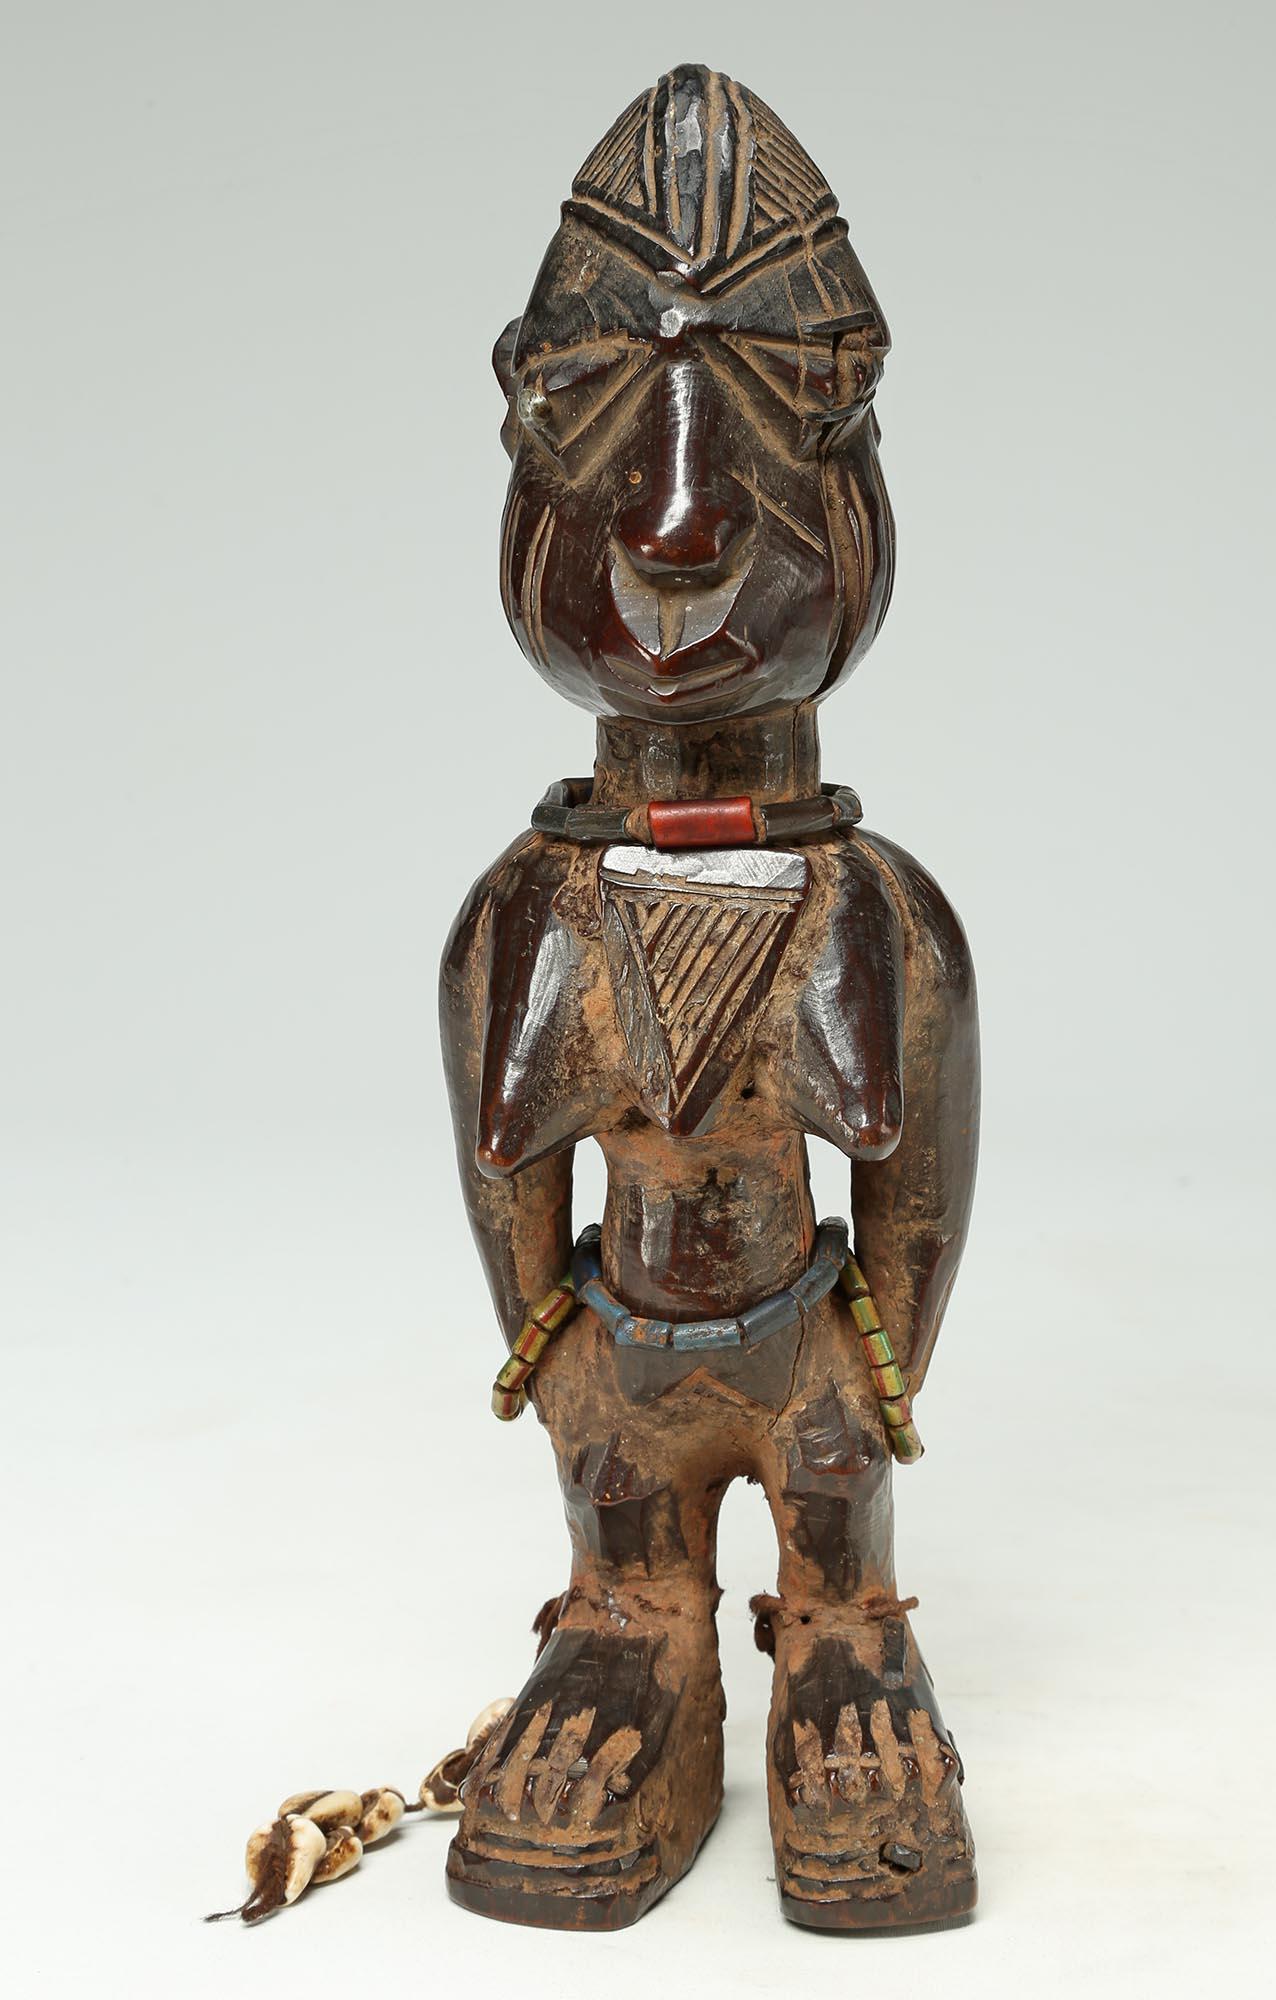 A finely carved female twin figure, ere Ibeji, Yoruba People, Nigeria, created in the early 20th century. 
With a domed plaited coiffure, expressive eyes, and extensive wear and polish from native use. Areas of encrusted red camwood powder between